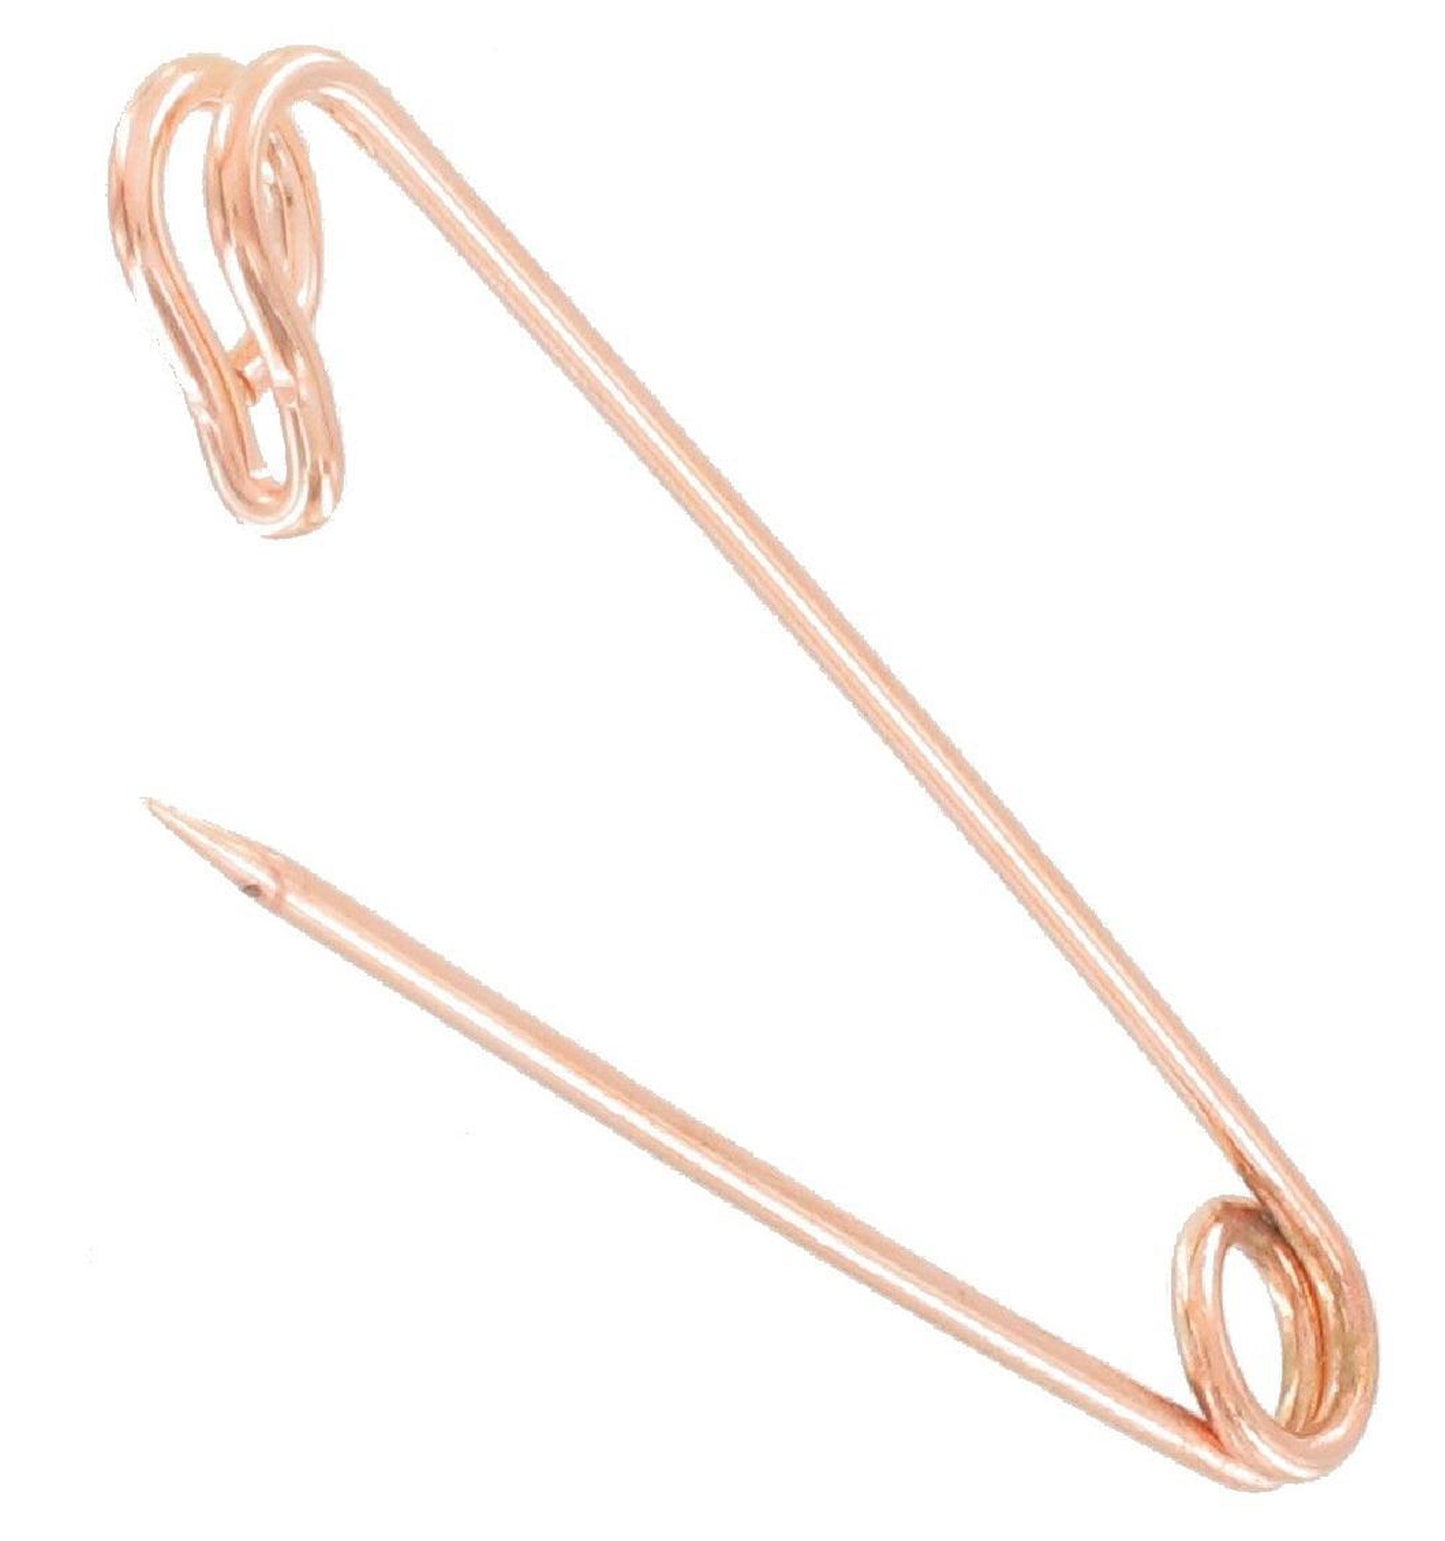 USA Safety Pin Brooch Rose Gold Tone Cursive Initial Letter J Charm Dangle 2"